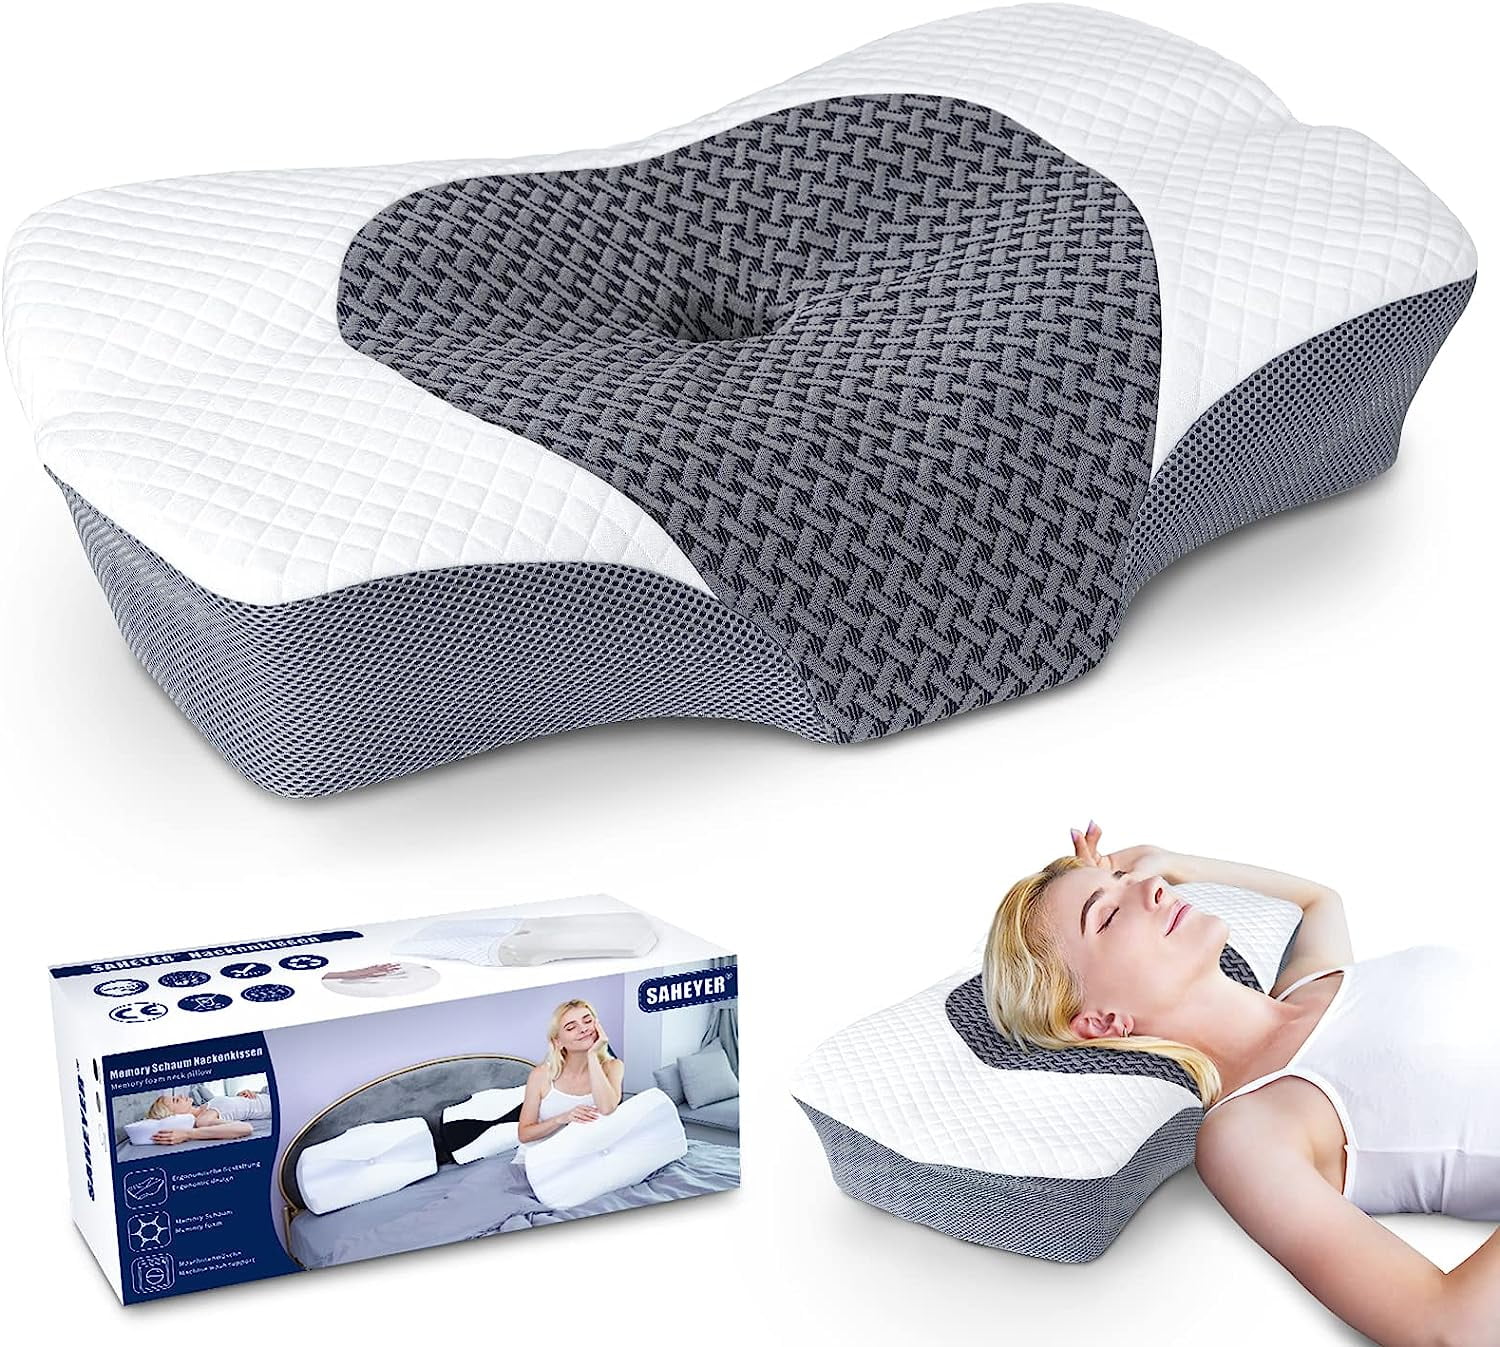 SAHEYER Neck Pillow Foam Bed Pillow for Ergonomic Neck and Shoulder Pain  Memory Ergonomic Neck Support Orthopedic Pillow 25 x 15.98 x 4.17/5.31  inches , 2.86 Ib (Grey) 